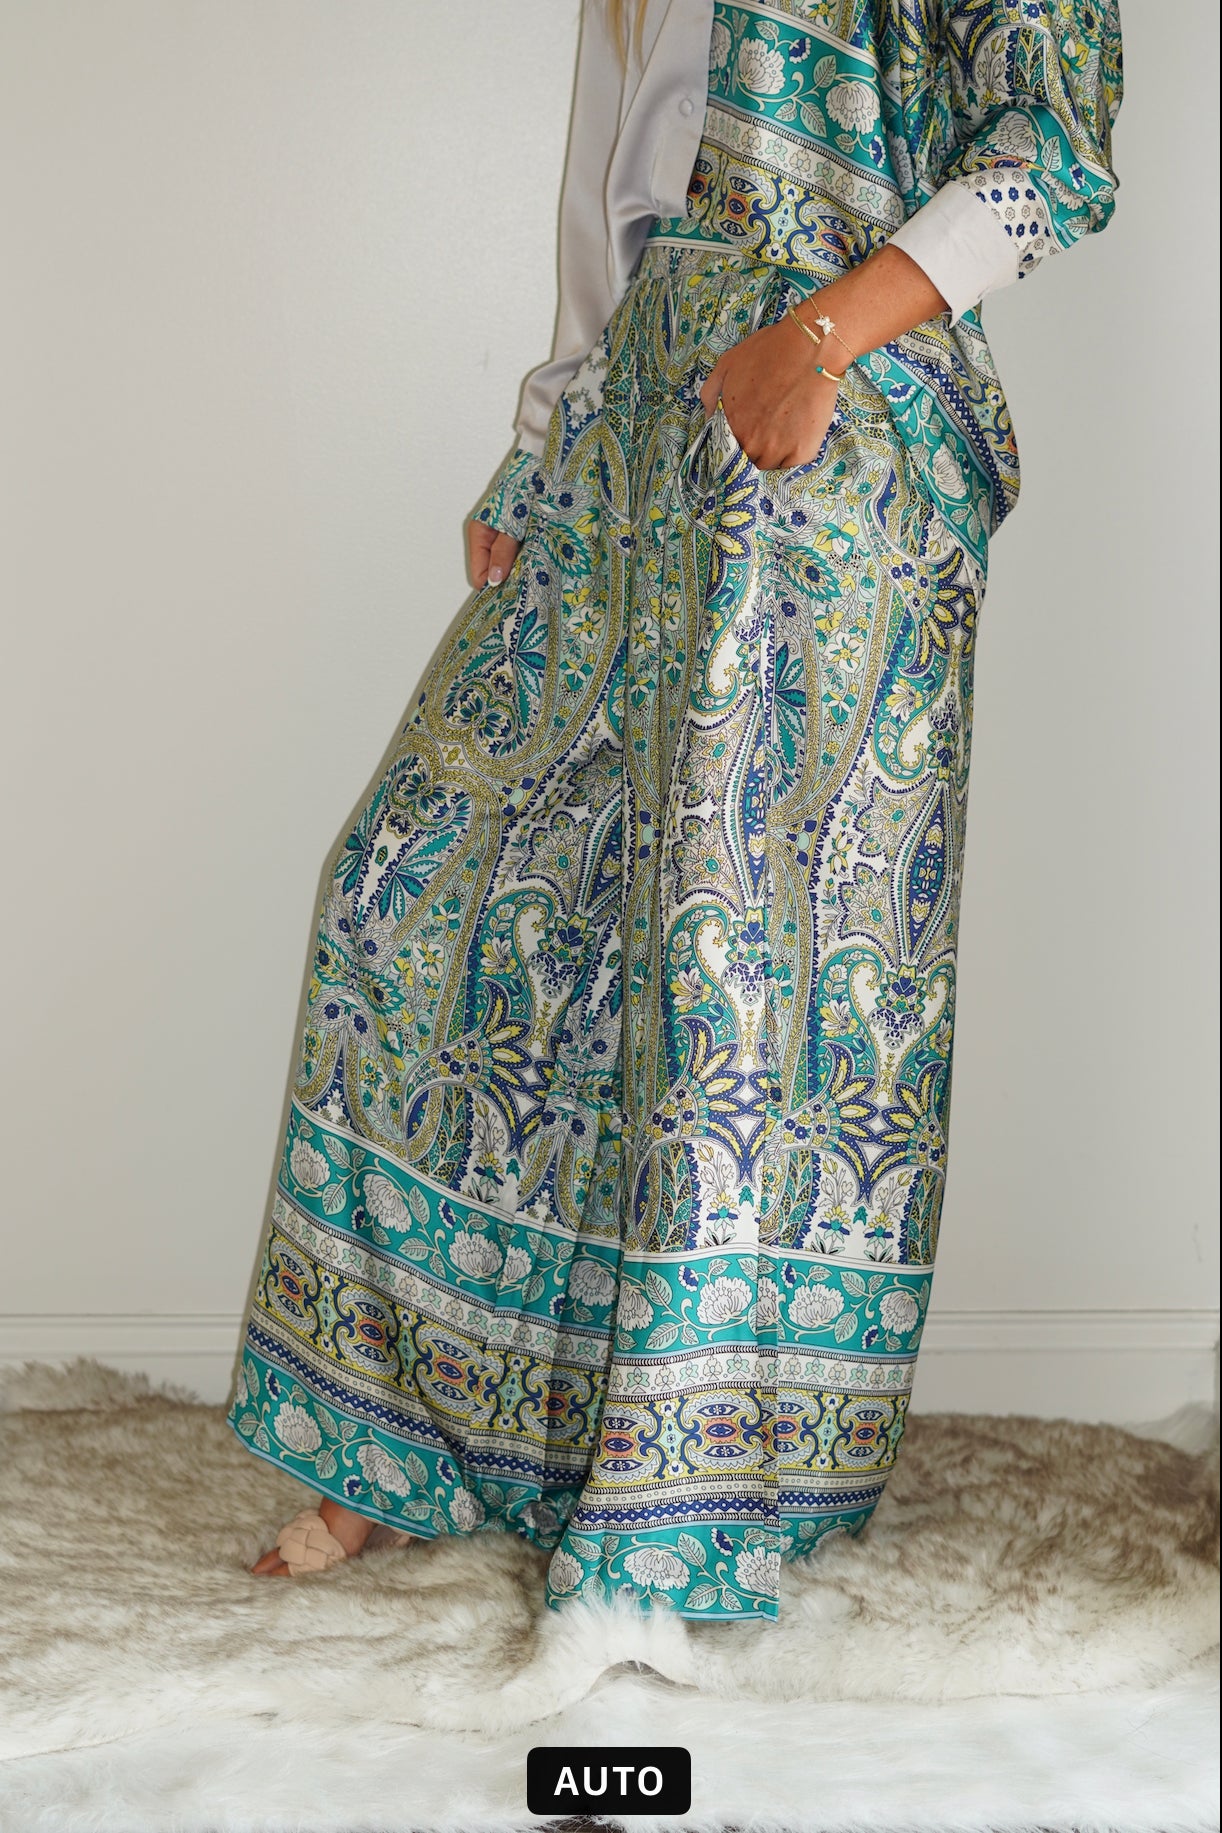 Paisley Satin Print Wide Leg Pants Elastic band on back of waistline Wide Leg Satin Material Teal Printed Pants Fitted waistband, Pants length comes to below the ankles. 100% Polyester Hand wash cold, do not bleach. Hang or line dry. Model is wearing size Small